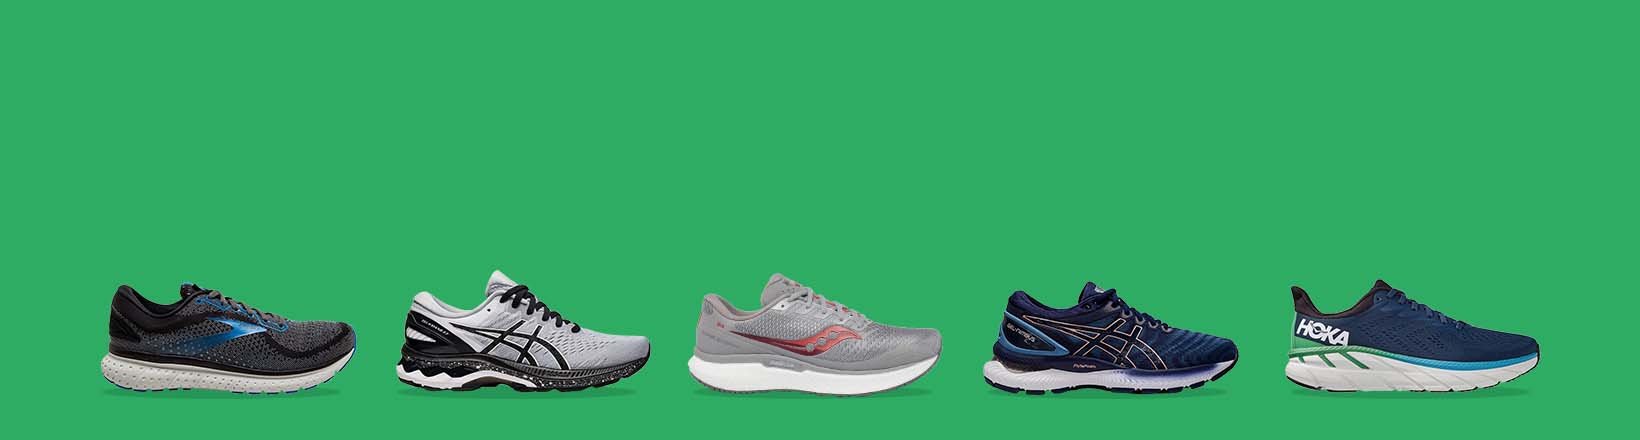 Perfect Fit Zone: Get Custom Running Shoes at Road Runner Sports